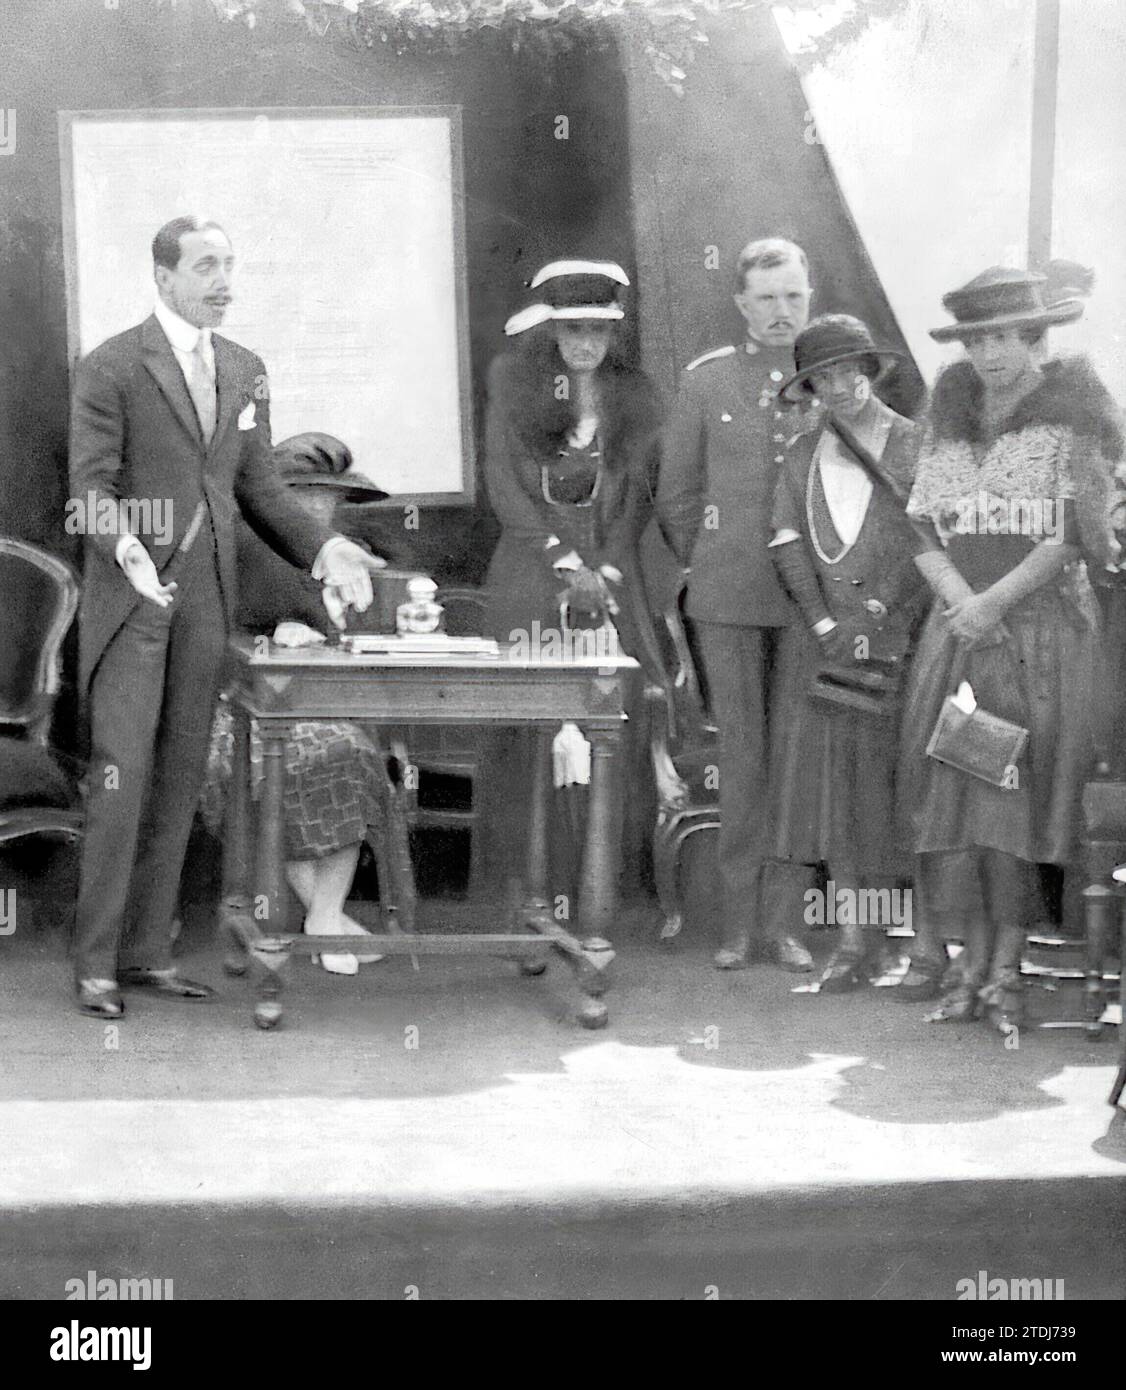 08/29/1920. Santander. New Hospital. HM the King accompanied by HM The Queen, delivering a speech to mark the laying of the foundation stone for the new hospital. Credit: Album / Archivo ABC / Julio Duque Stock Photo